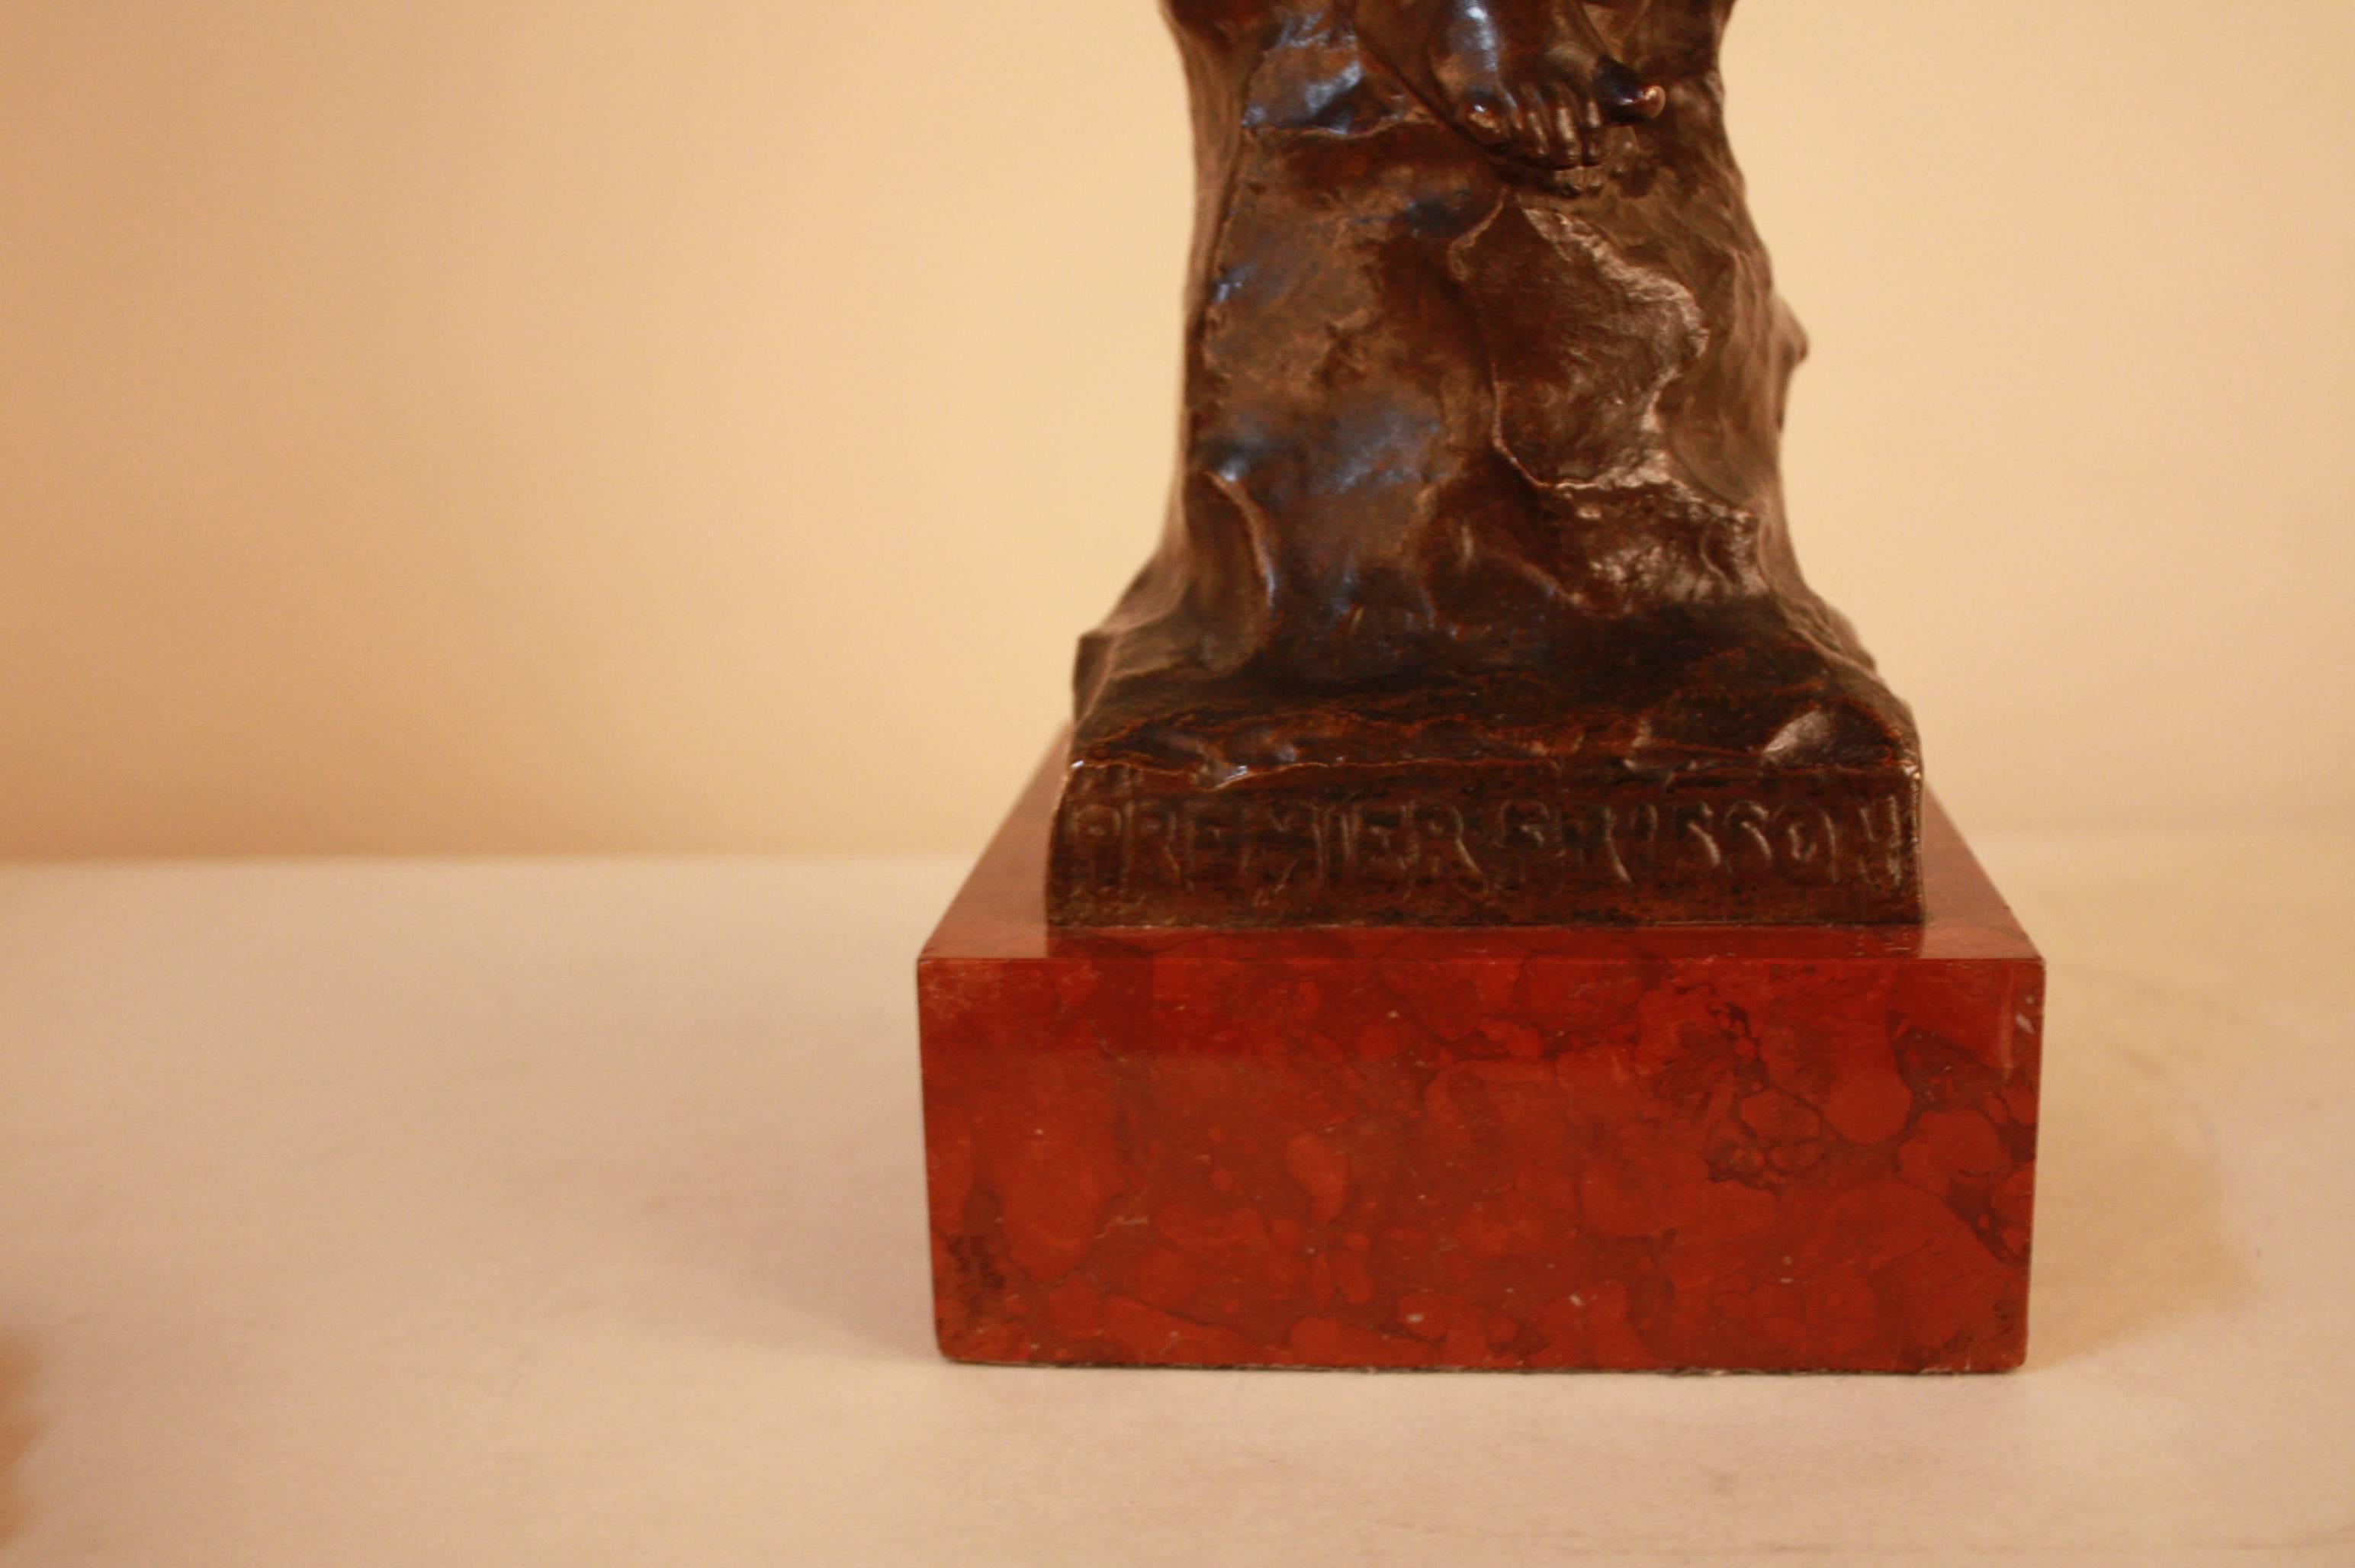 Late 19th century dark brown patina bronze statue of a young boy sitting on the rock over a red/brown marble by Eug. Marioton.